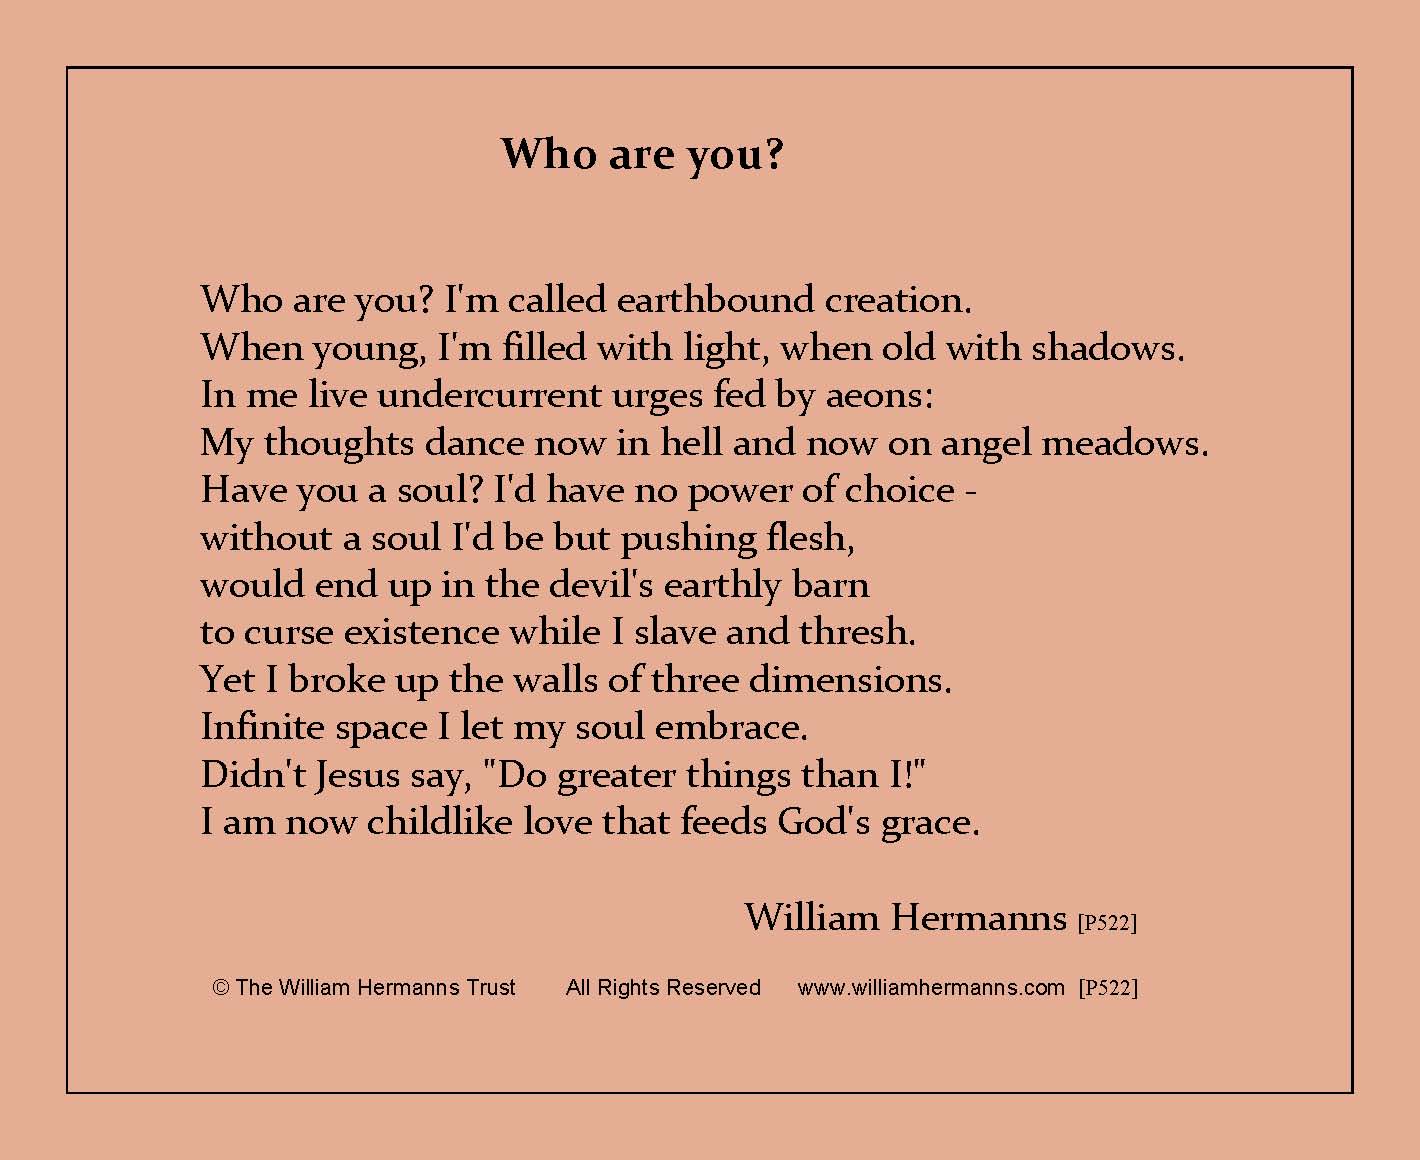 Who are you?  by William Hermanns